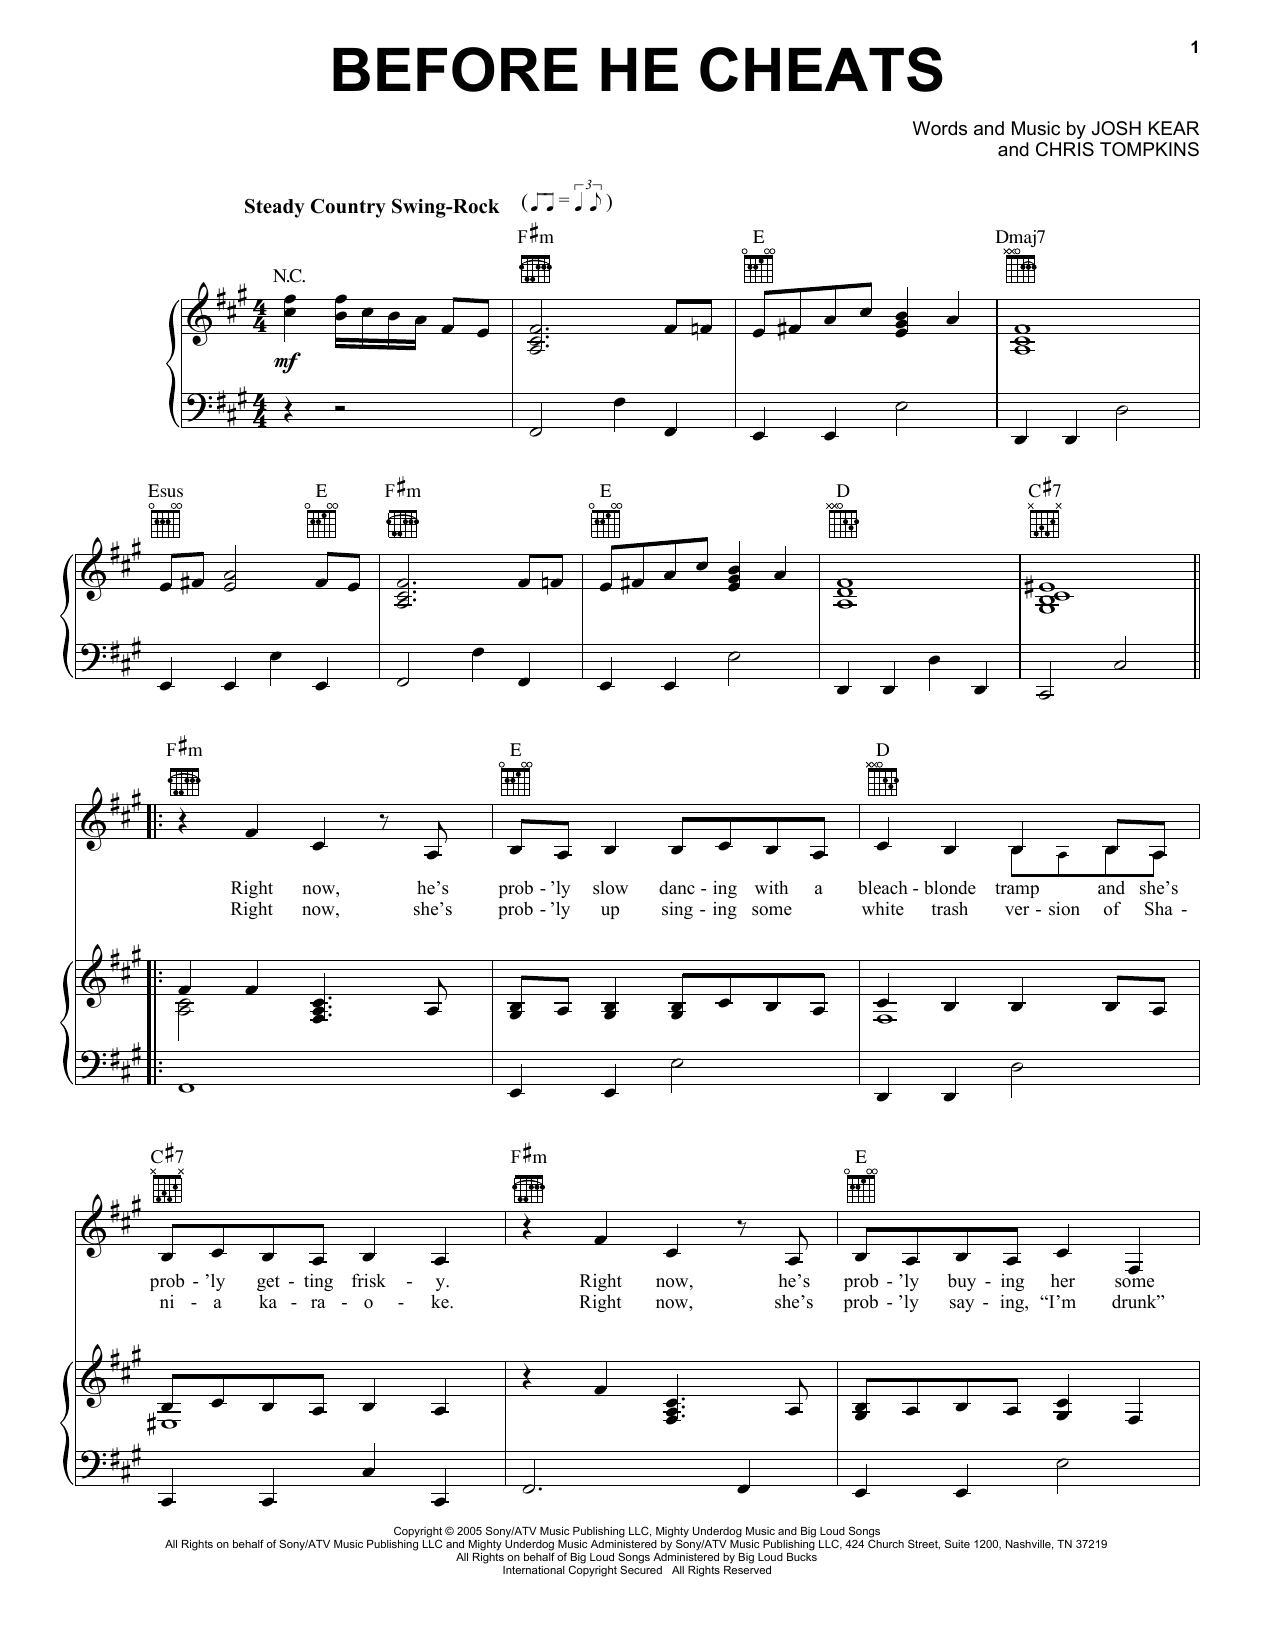 carrie-underwood-before-he-cheats-sheet-music-notes-download